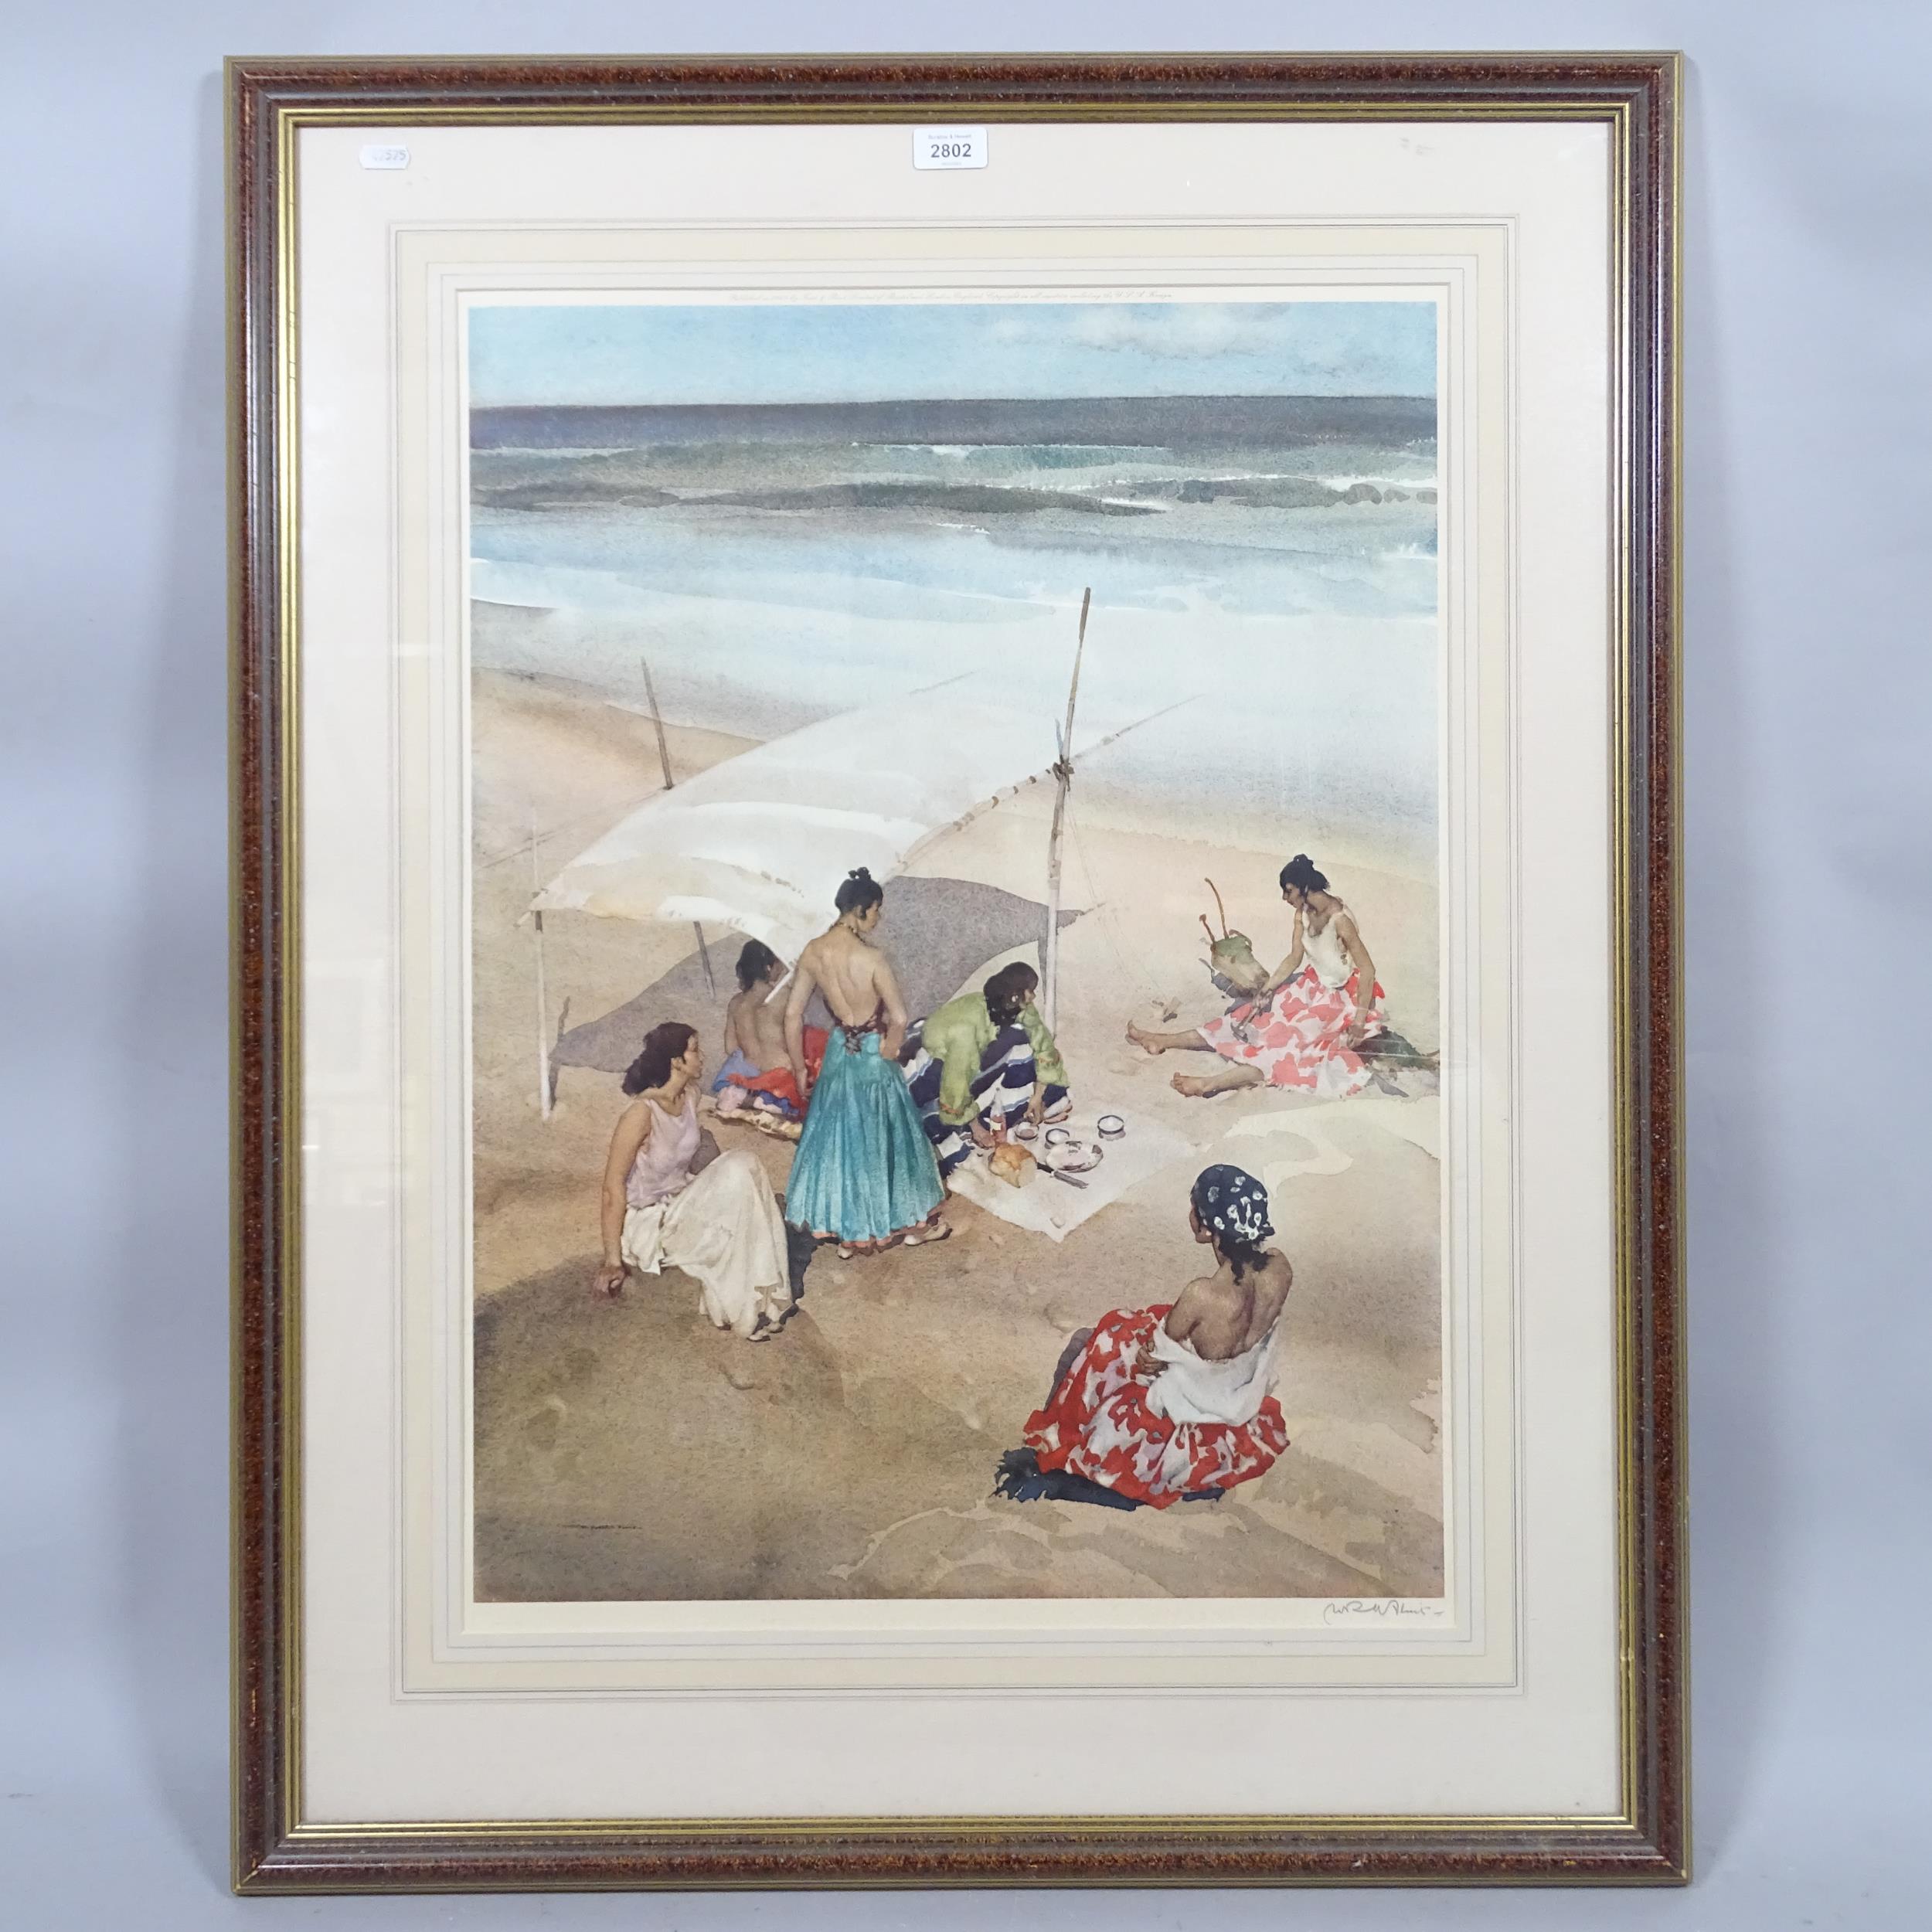 William Russell Flint (1880 - 1969), a print of gypsies on a Mediterranean beach, published in